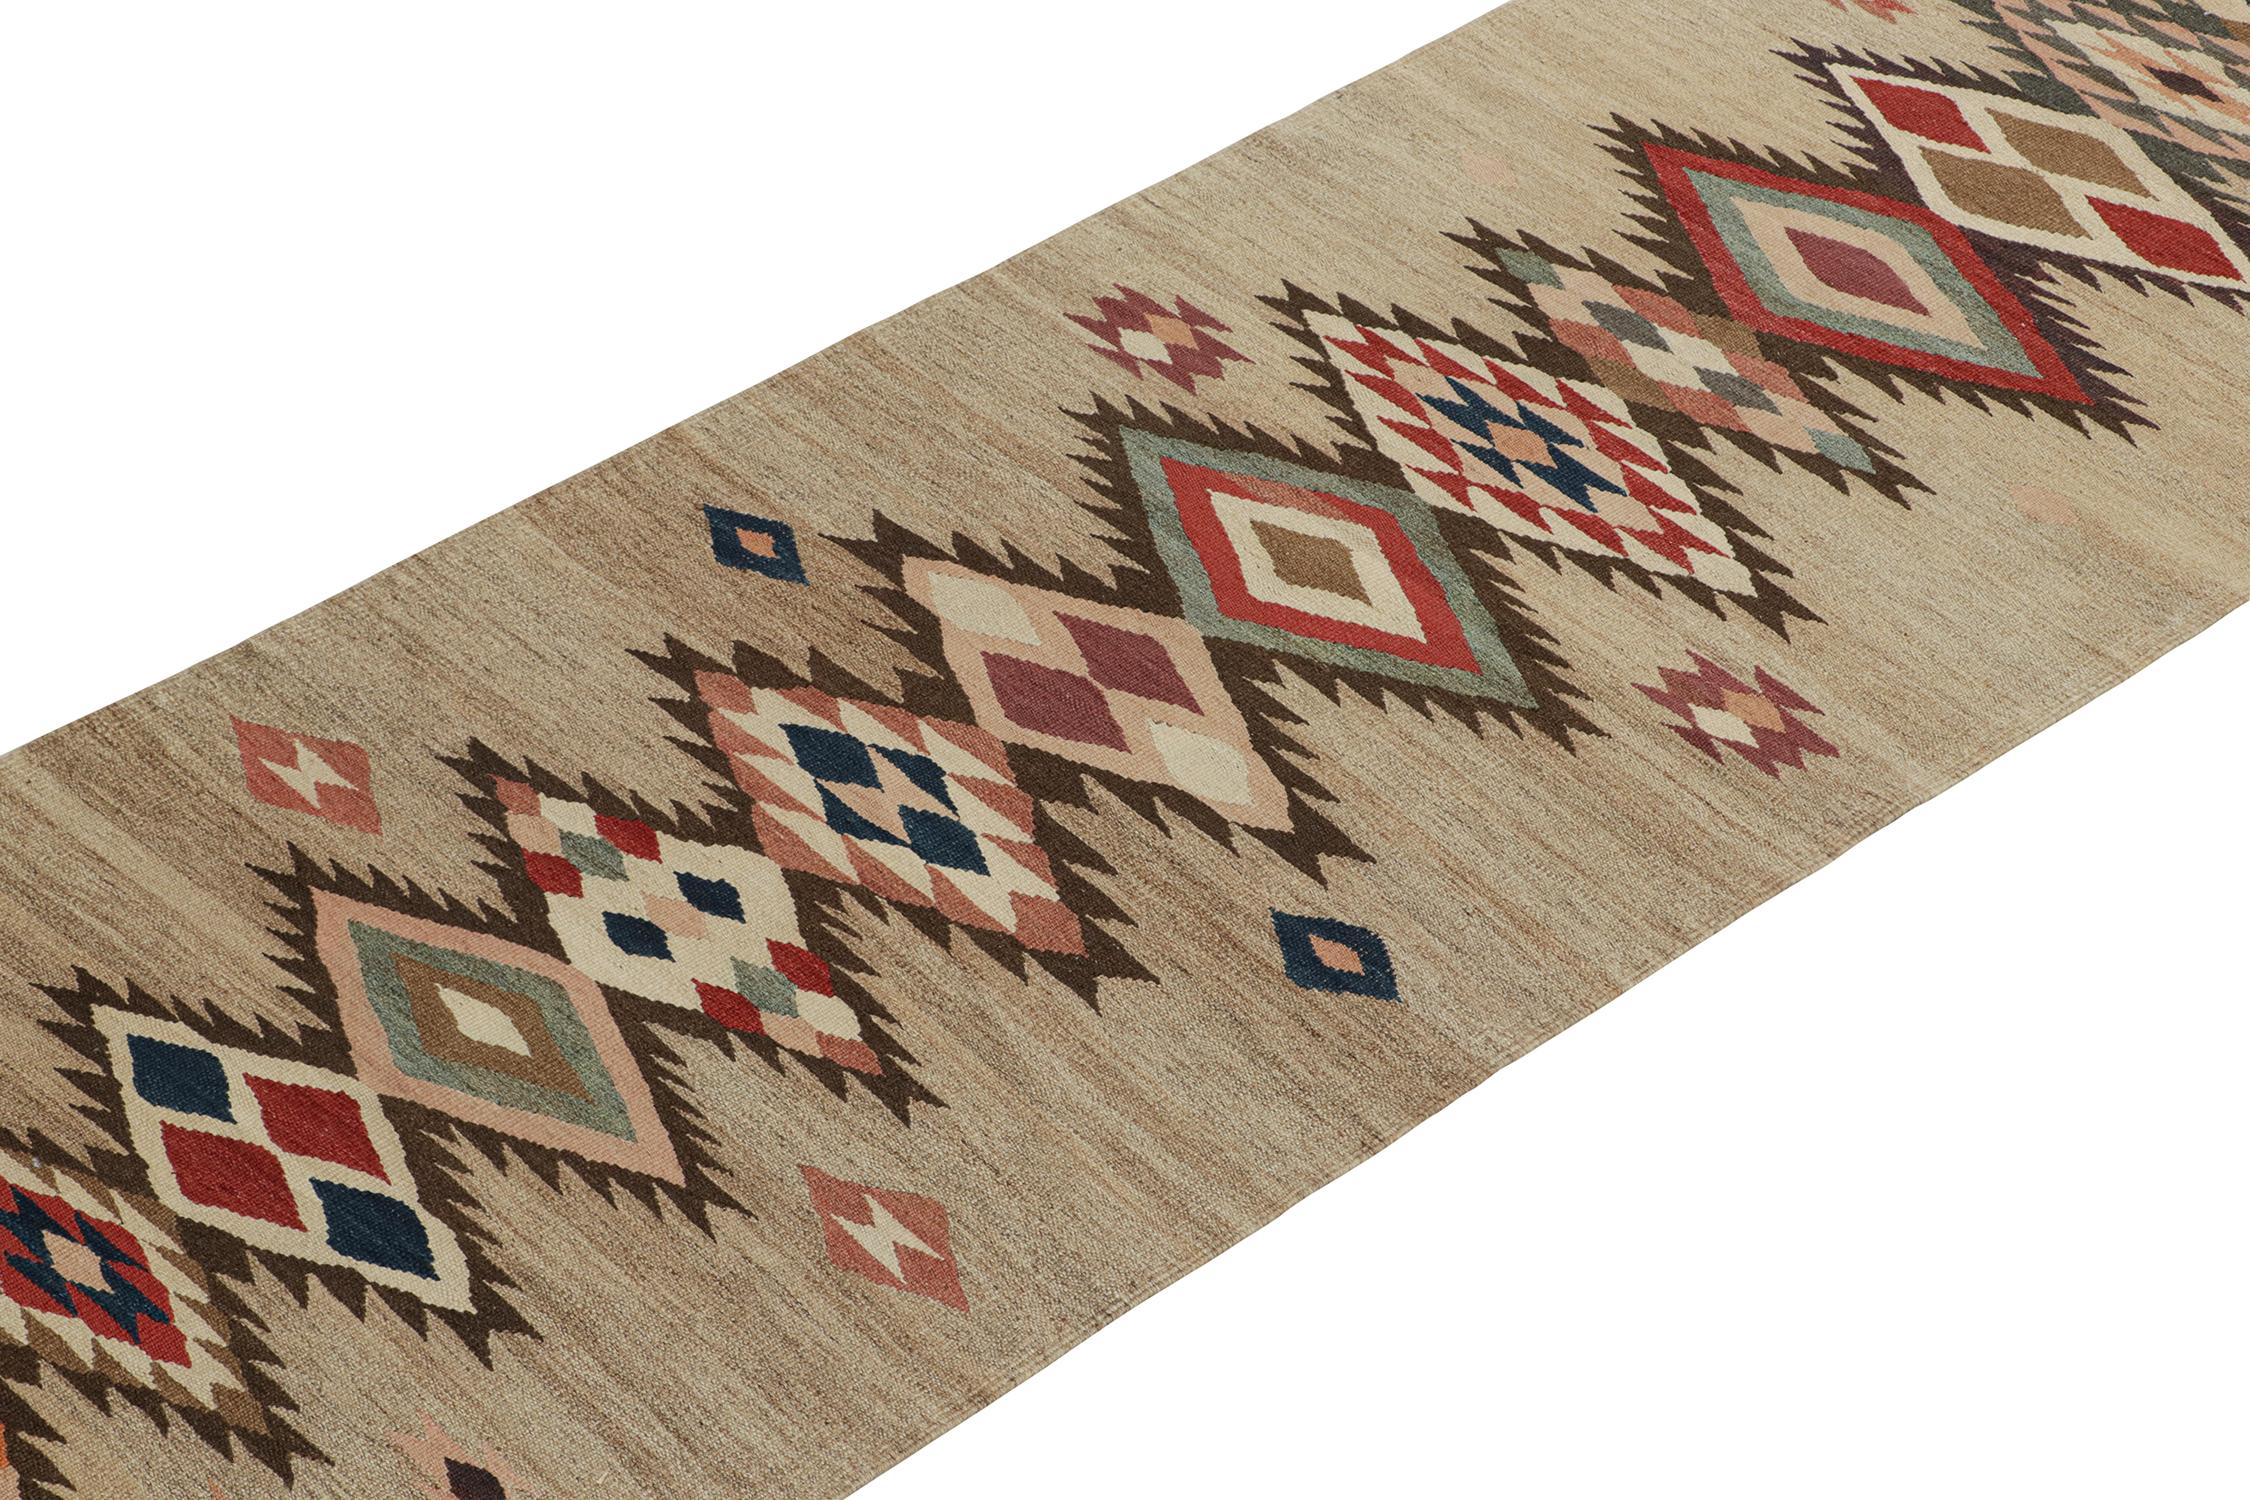 Hand-Knotted Vintage Shahsavan Tribal Kilim Runner in Polychromatic Patterns by Rug & Kilim For Sale